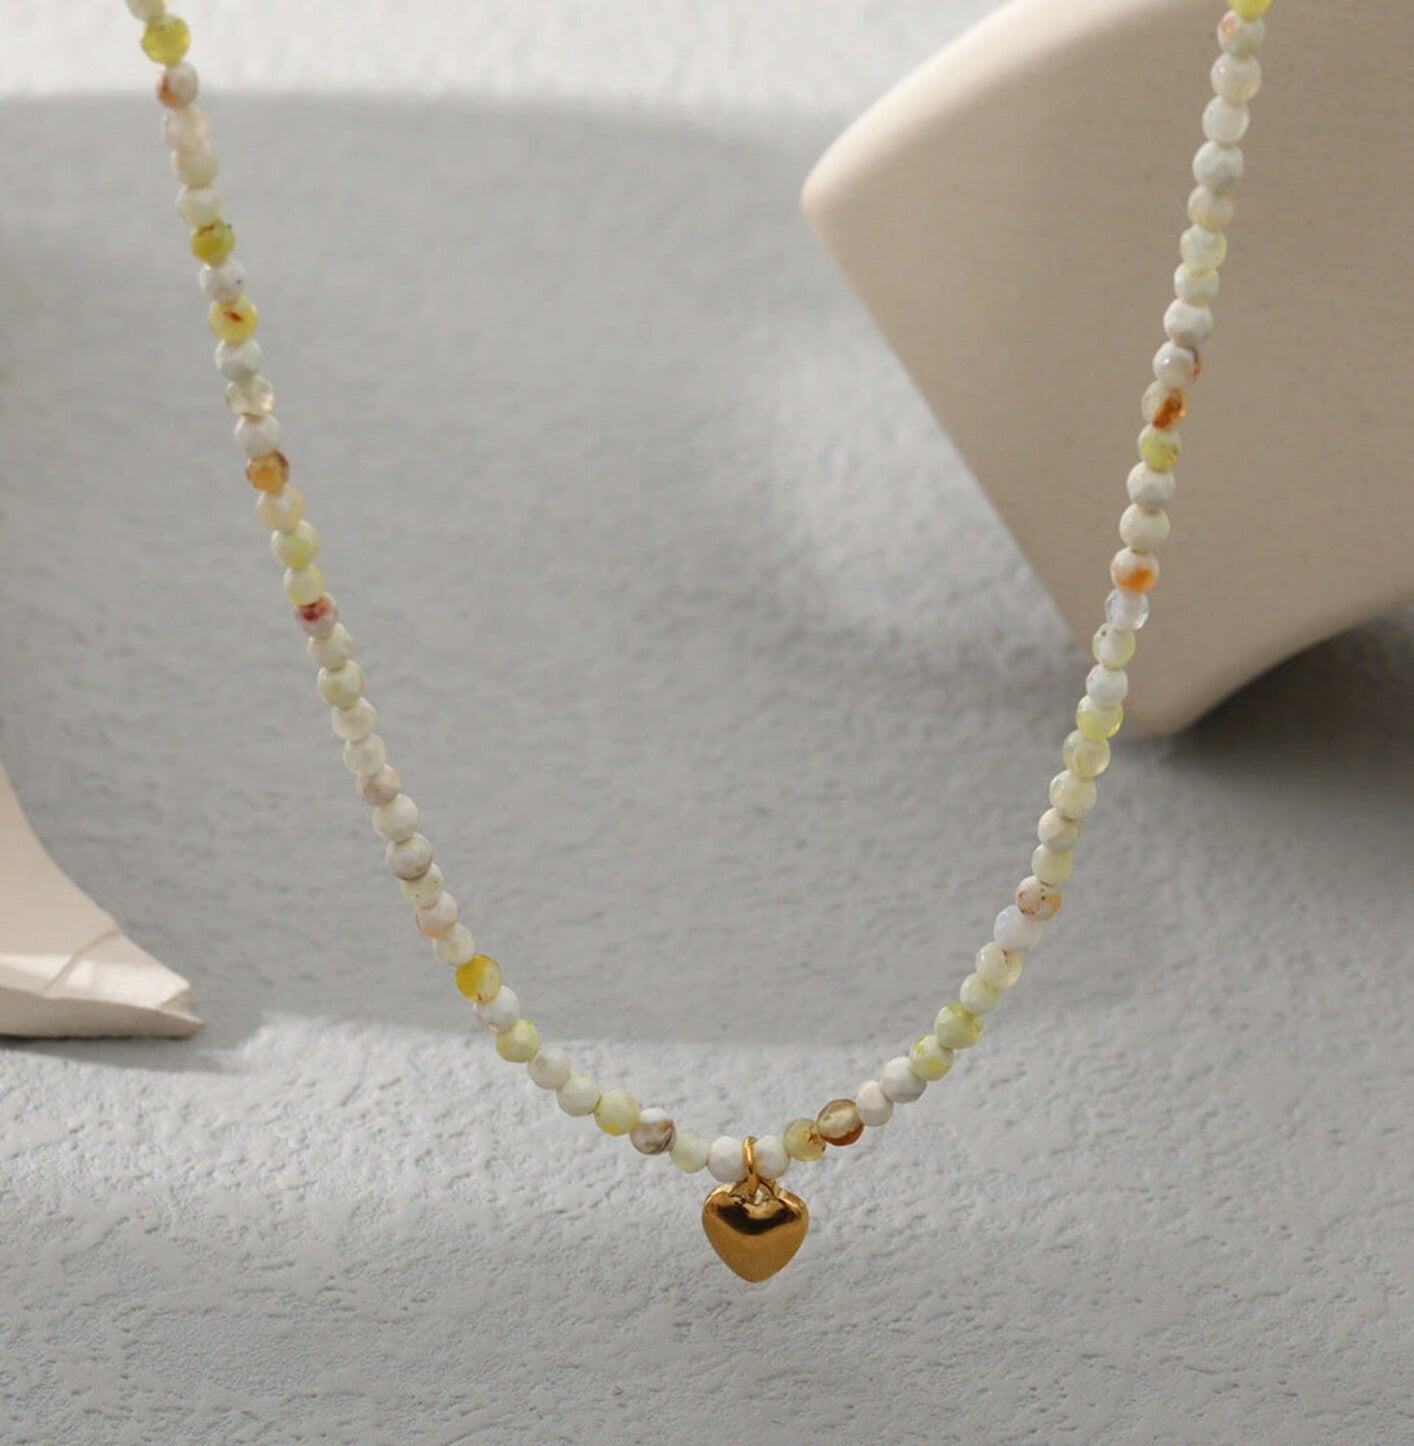 PEARL HEART SHAPE neck Yubama Jewelry Online Store - The Elegant Designs of Gold and Silver ! 